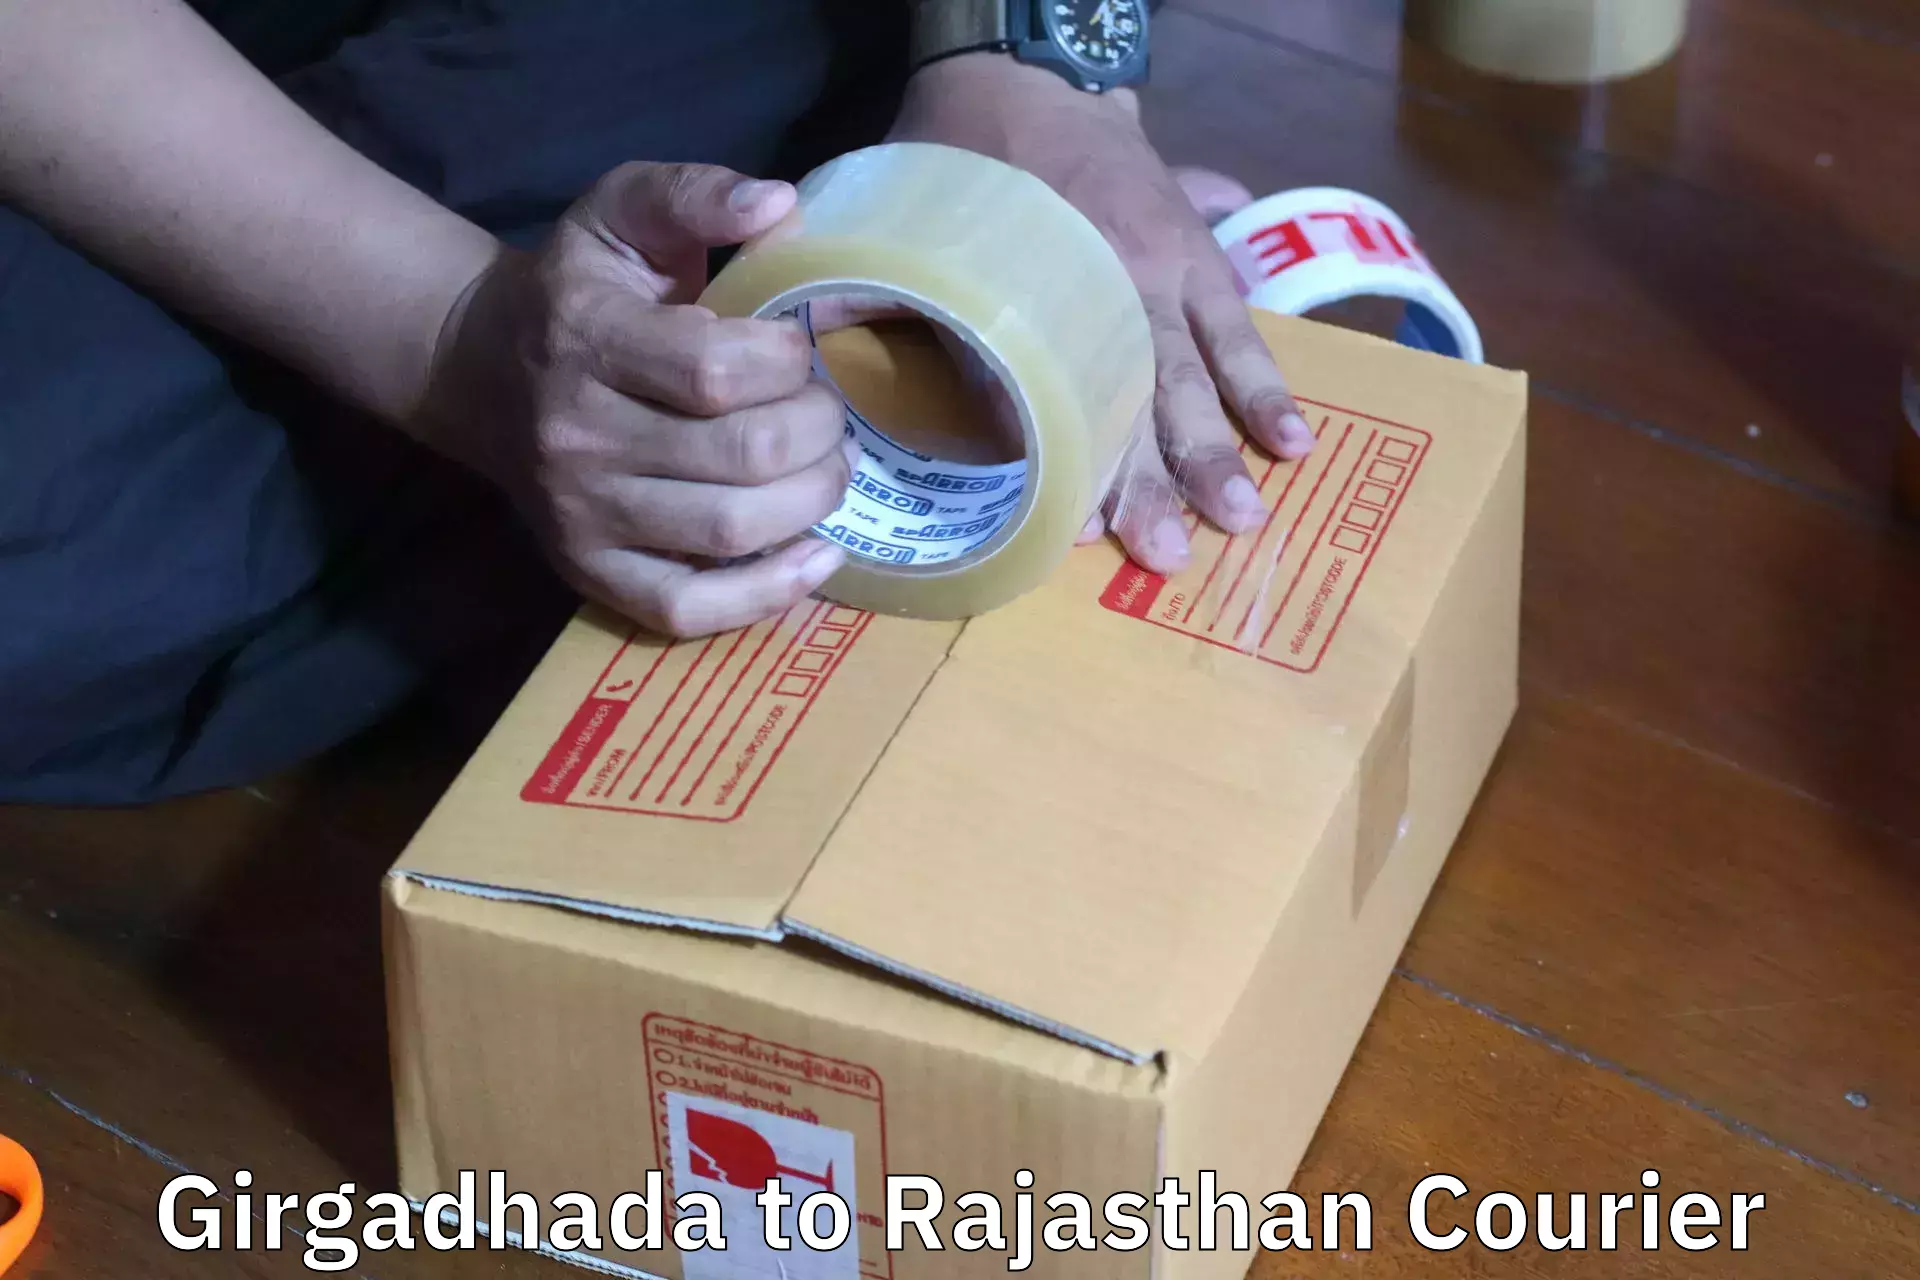 Home moving specialists Girgadhada to Rajasthan